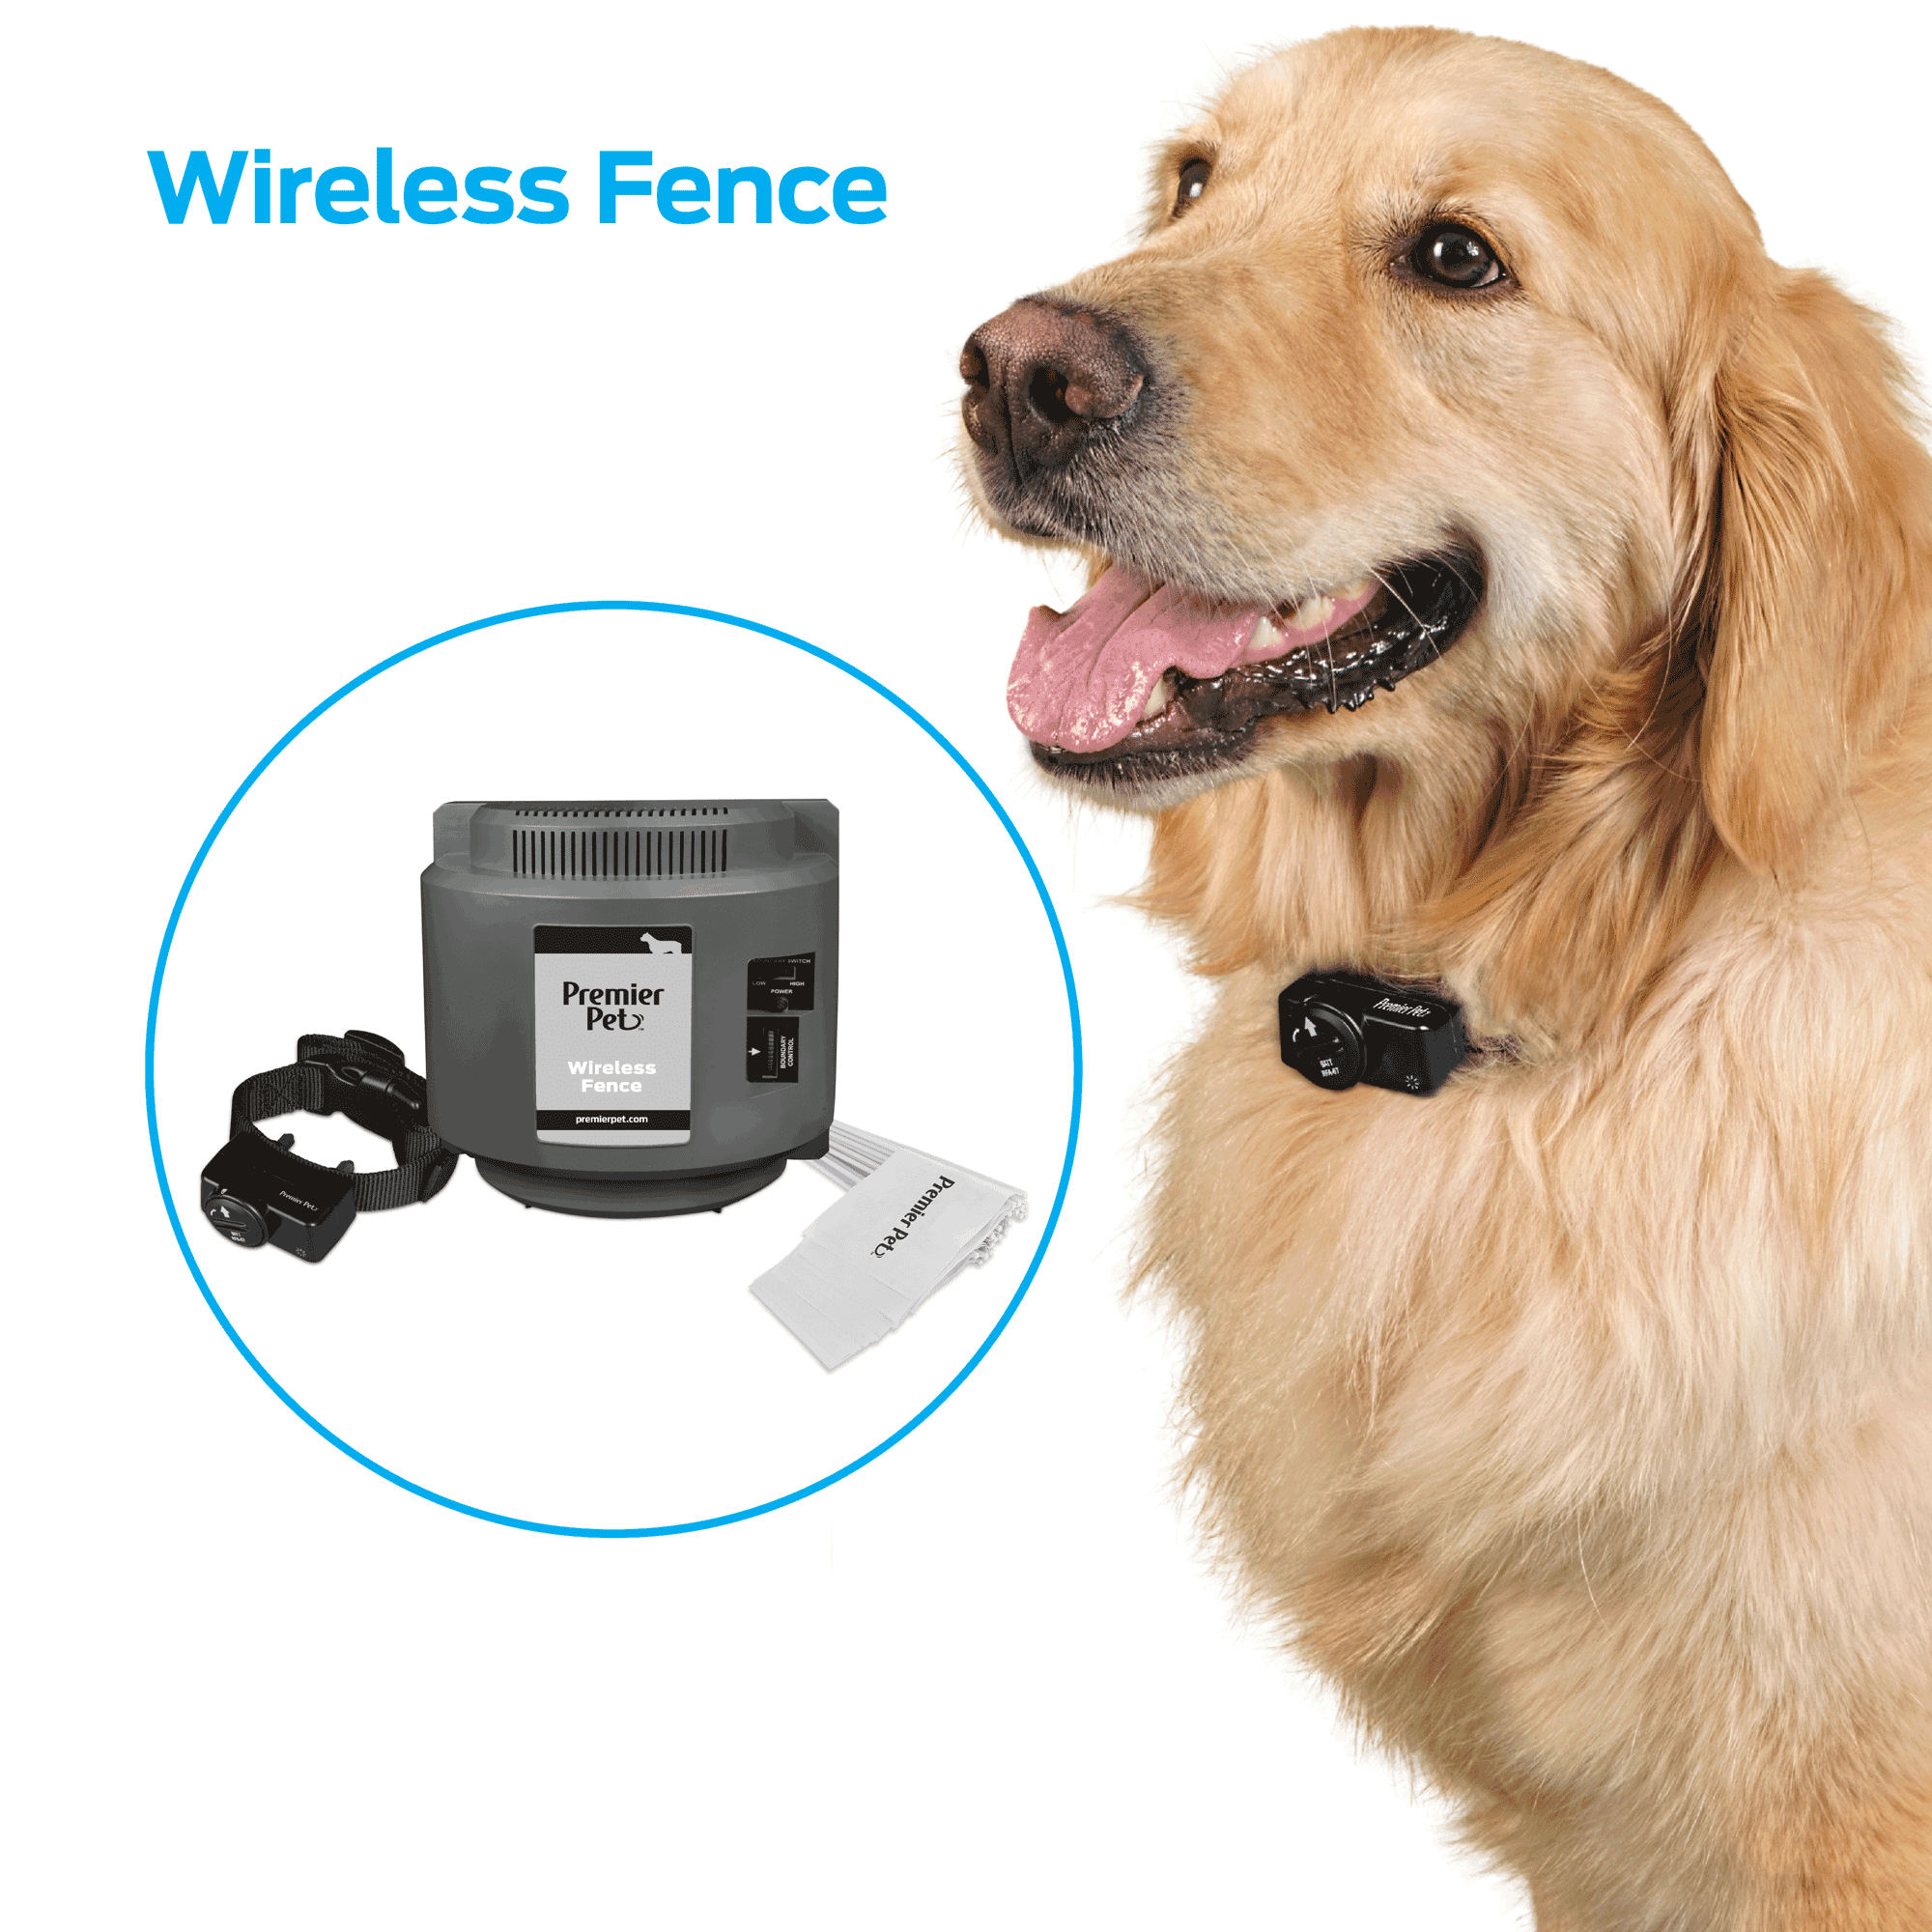 Electric Wireless Dog Fence System for Dog Wireless Dog Fence Pets Dog Containment System with IP65 Waterproof Dog Training Collar 2-in-1for All Dogs,for1dog